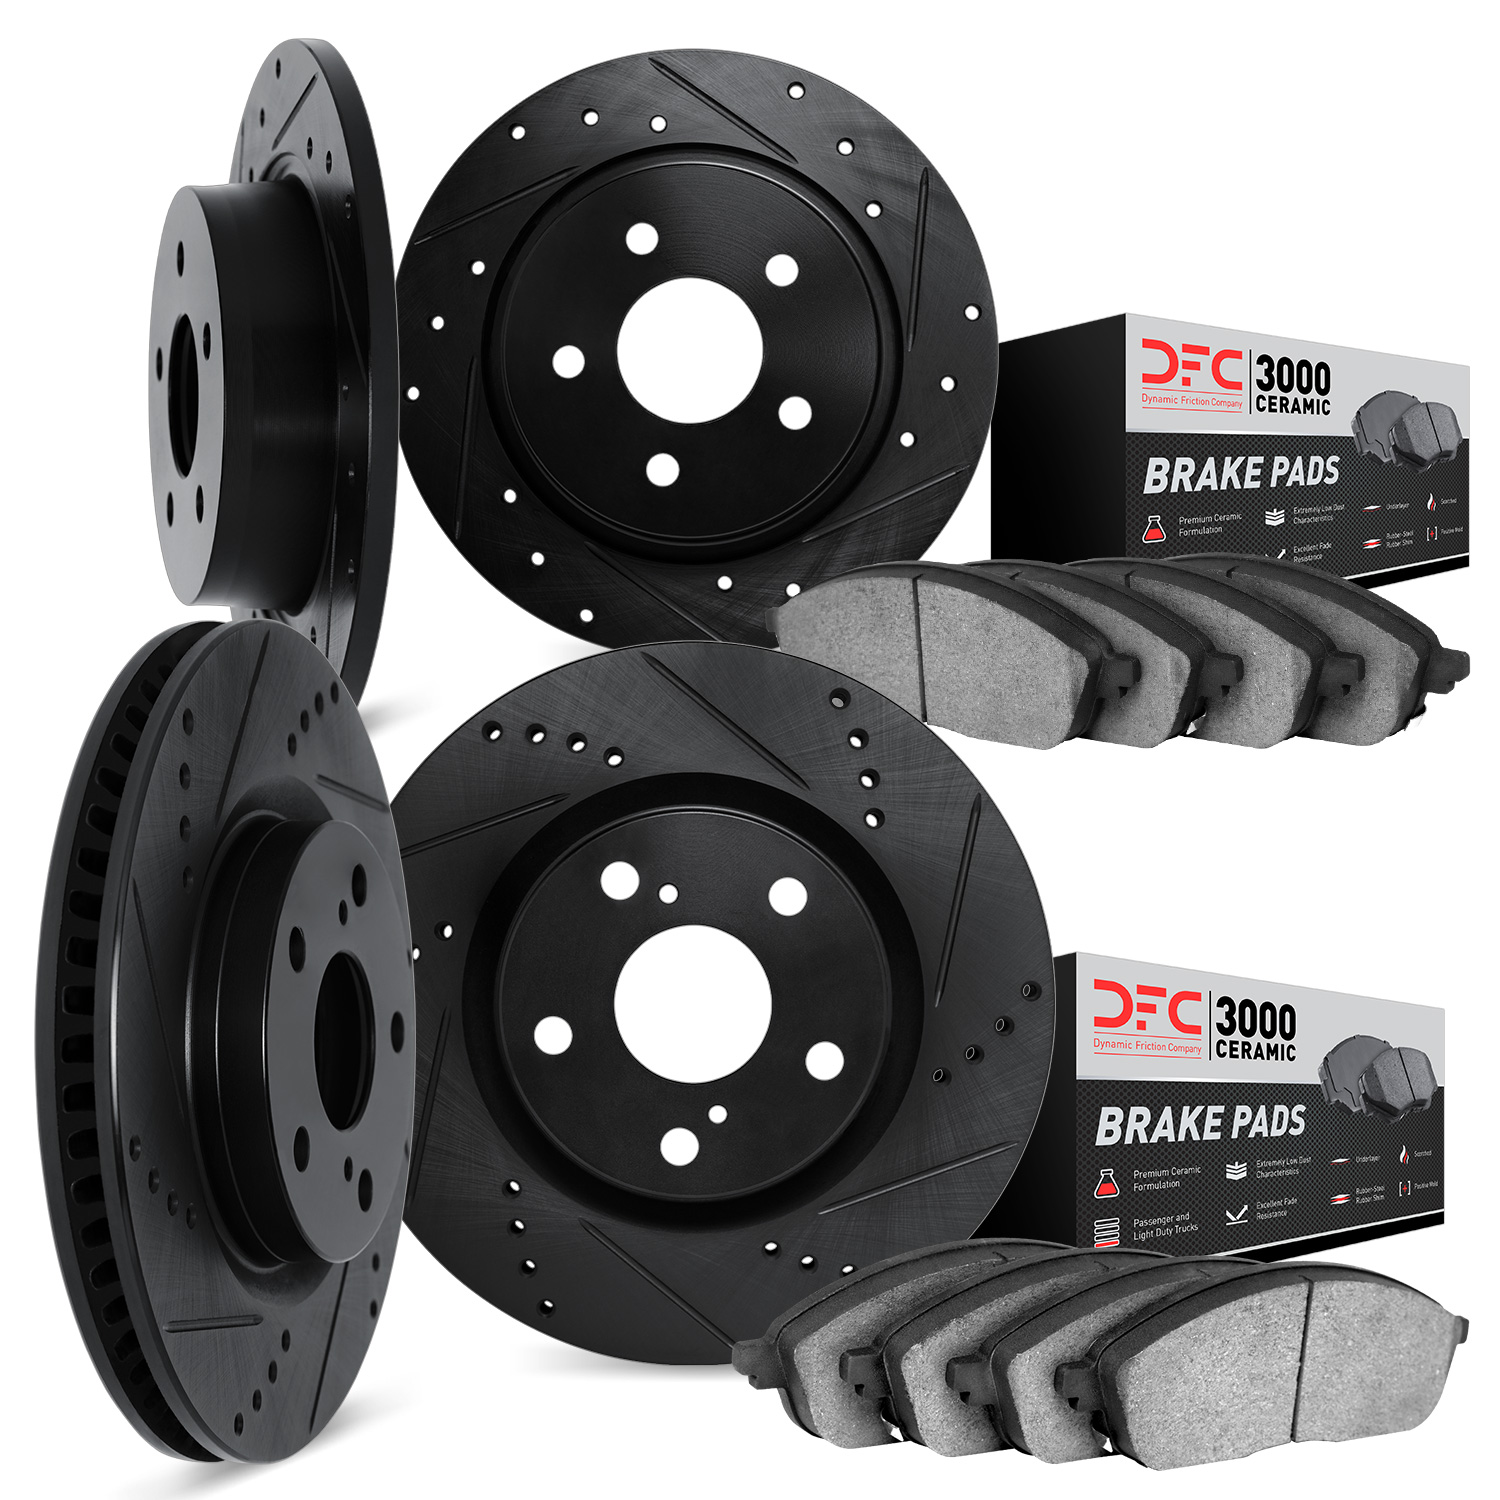 8304-59040 Drilled/Slotted Brake Rotors with 3000-Series Ceramic Brake Pads Kit [Black], 2003-2007 Acura/Honda, Position: Front